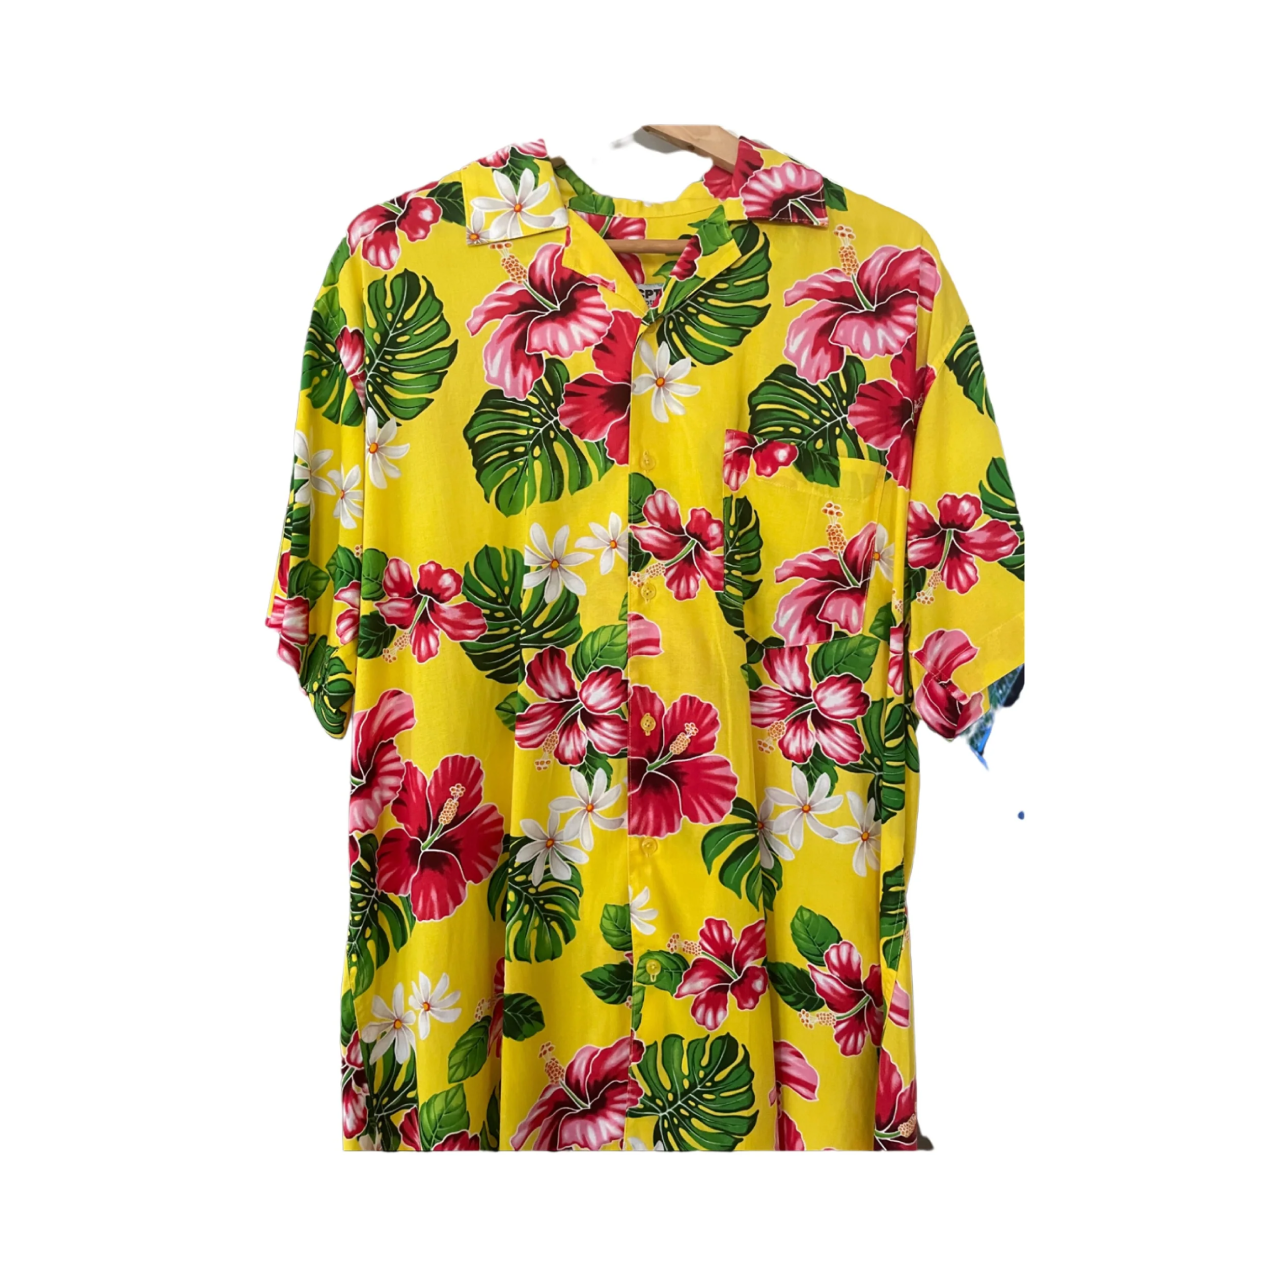 CPTN The Yellow Hibiscus shirt is a tropical treat for your wardrobe